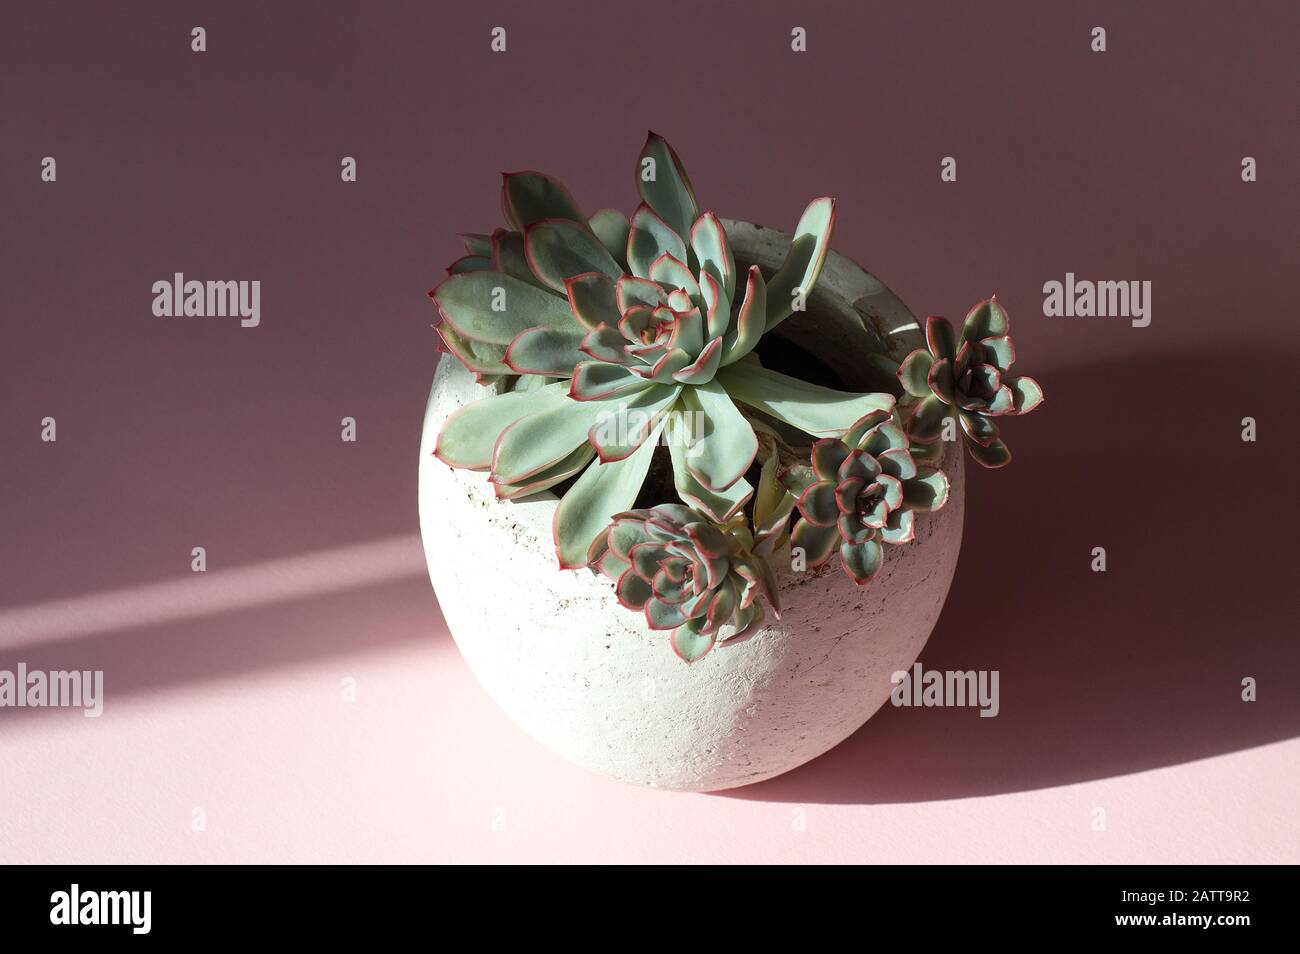 Echeveria elegans in round ceramic flower pot on pink background surrounded by light and shadow Stock Photo